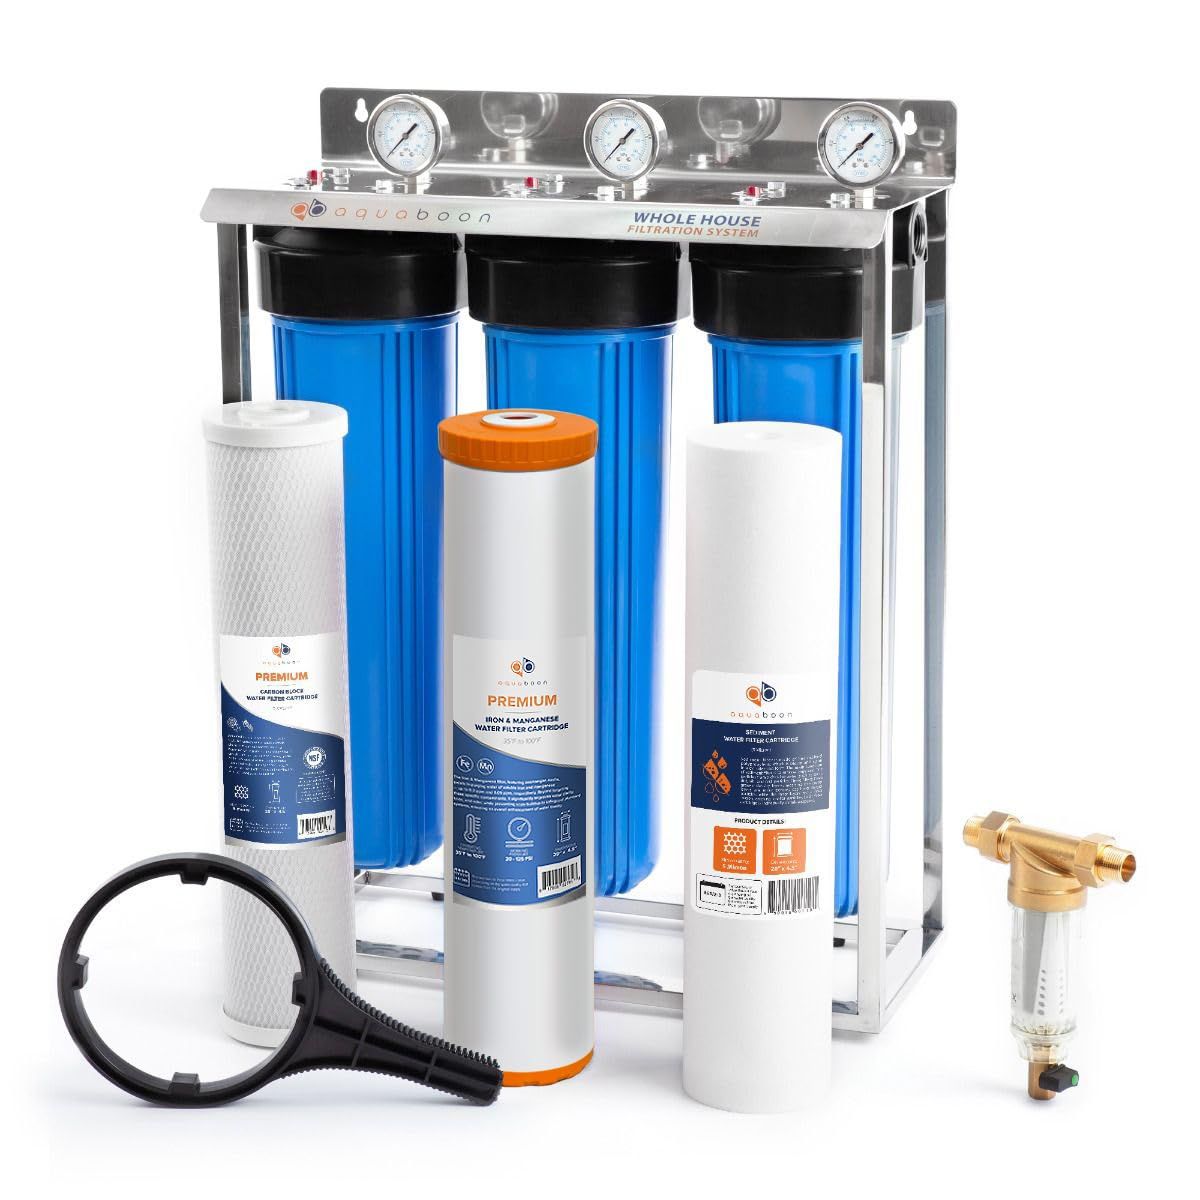 Aquaboon Whole House 3-Stage 20" Water Filtration System For Iron & Manganese Filtration (Carbon, Iron & Manganese, Sediment Filters), Stainless Steel Stand AB-3WHS20BB-1C20BB5MP-1IRM20BB-1S20BB5M